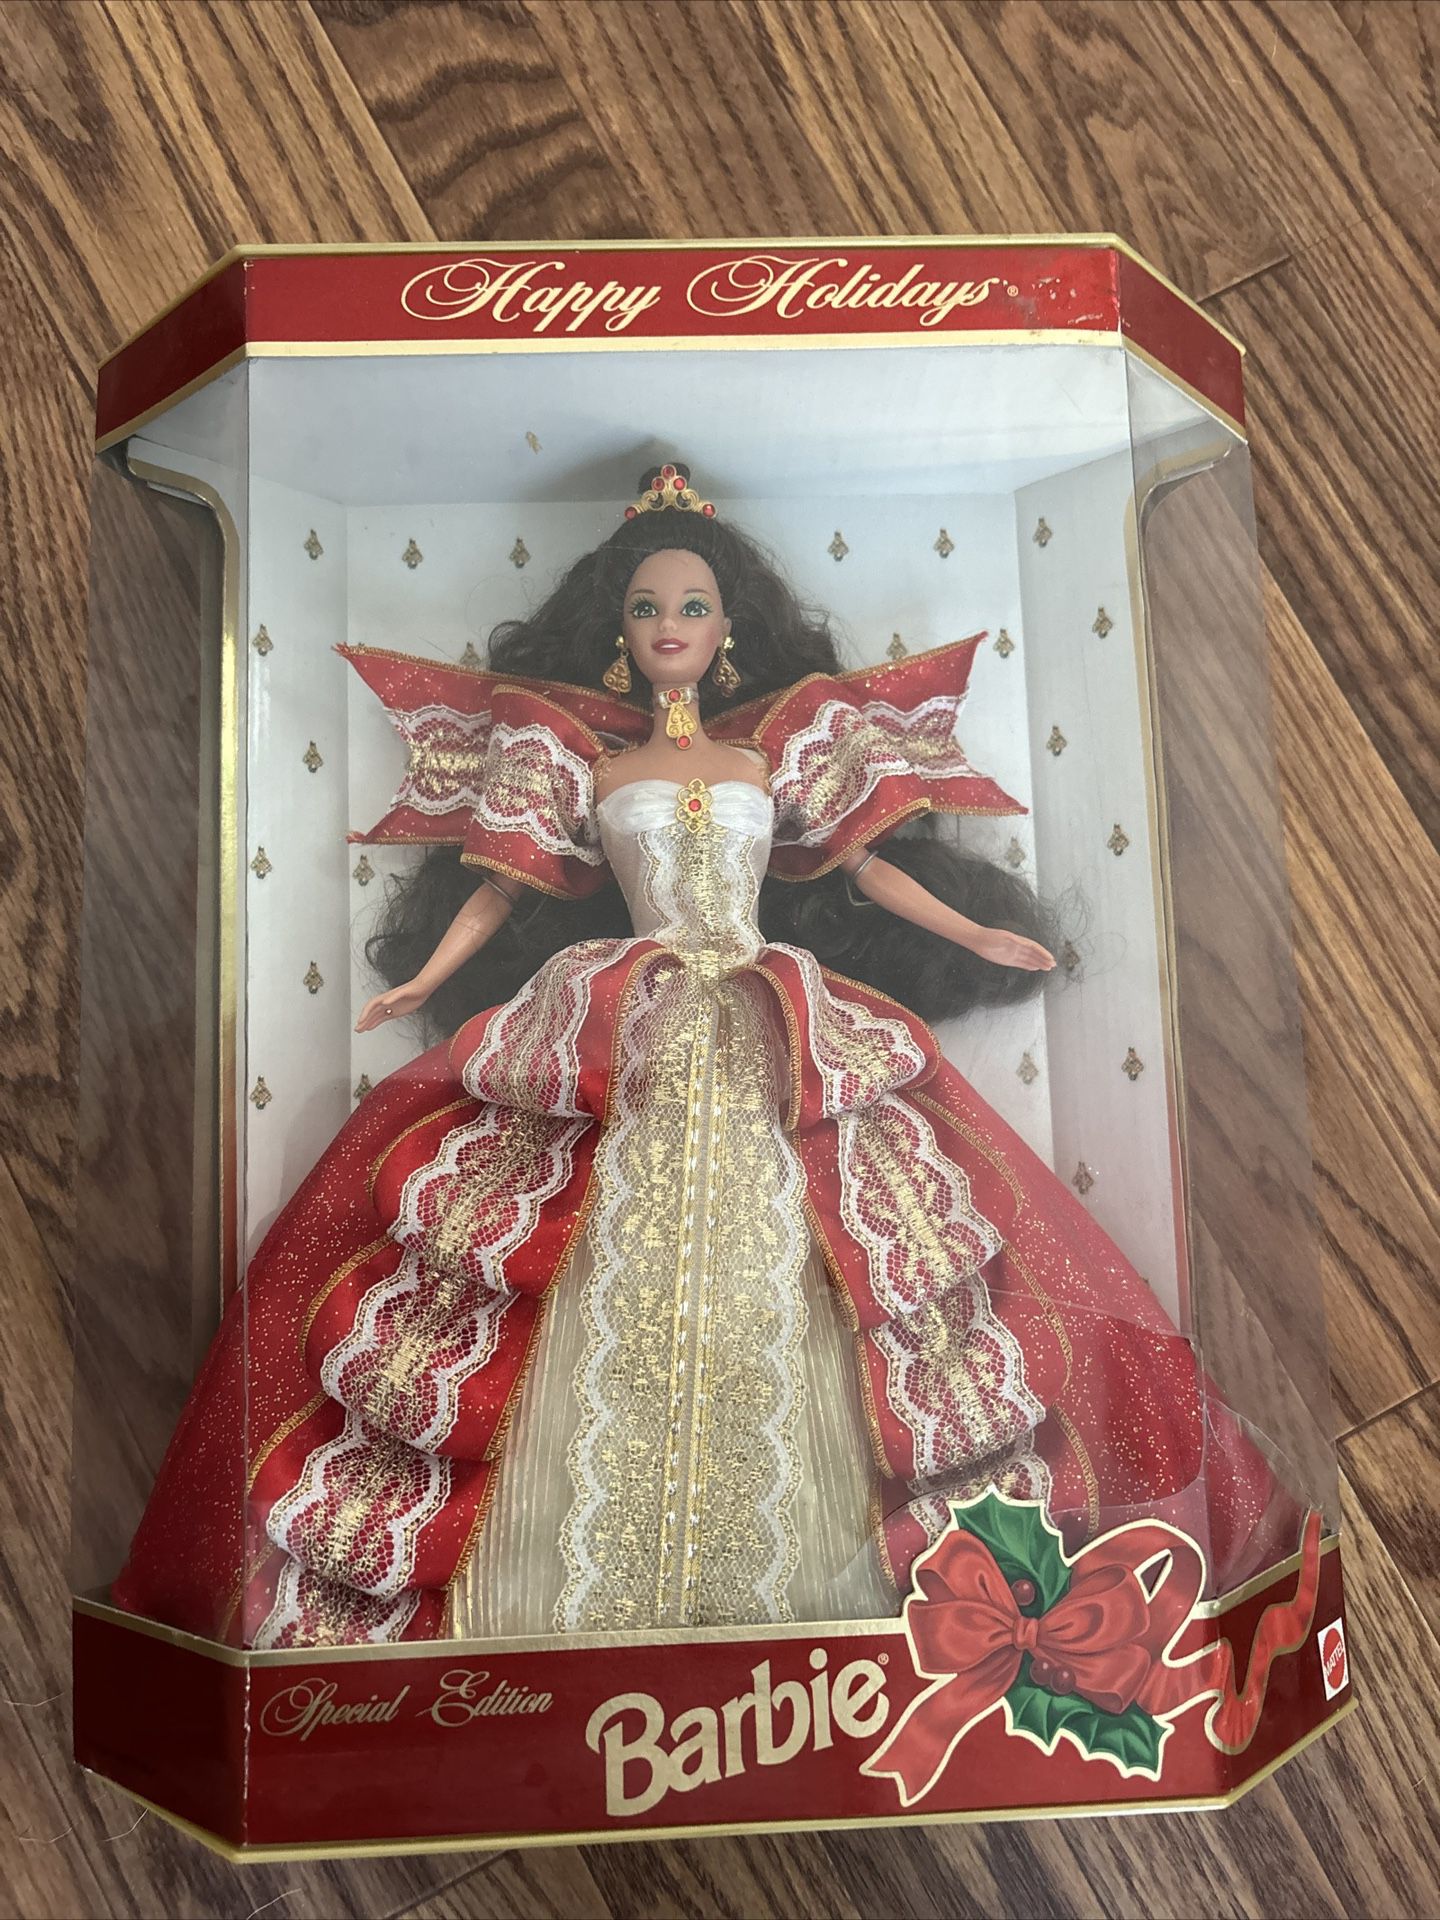 Special Edition (10th Anniversary) 1997 Happy Holidays Barbie Unopened